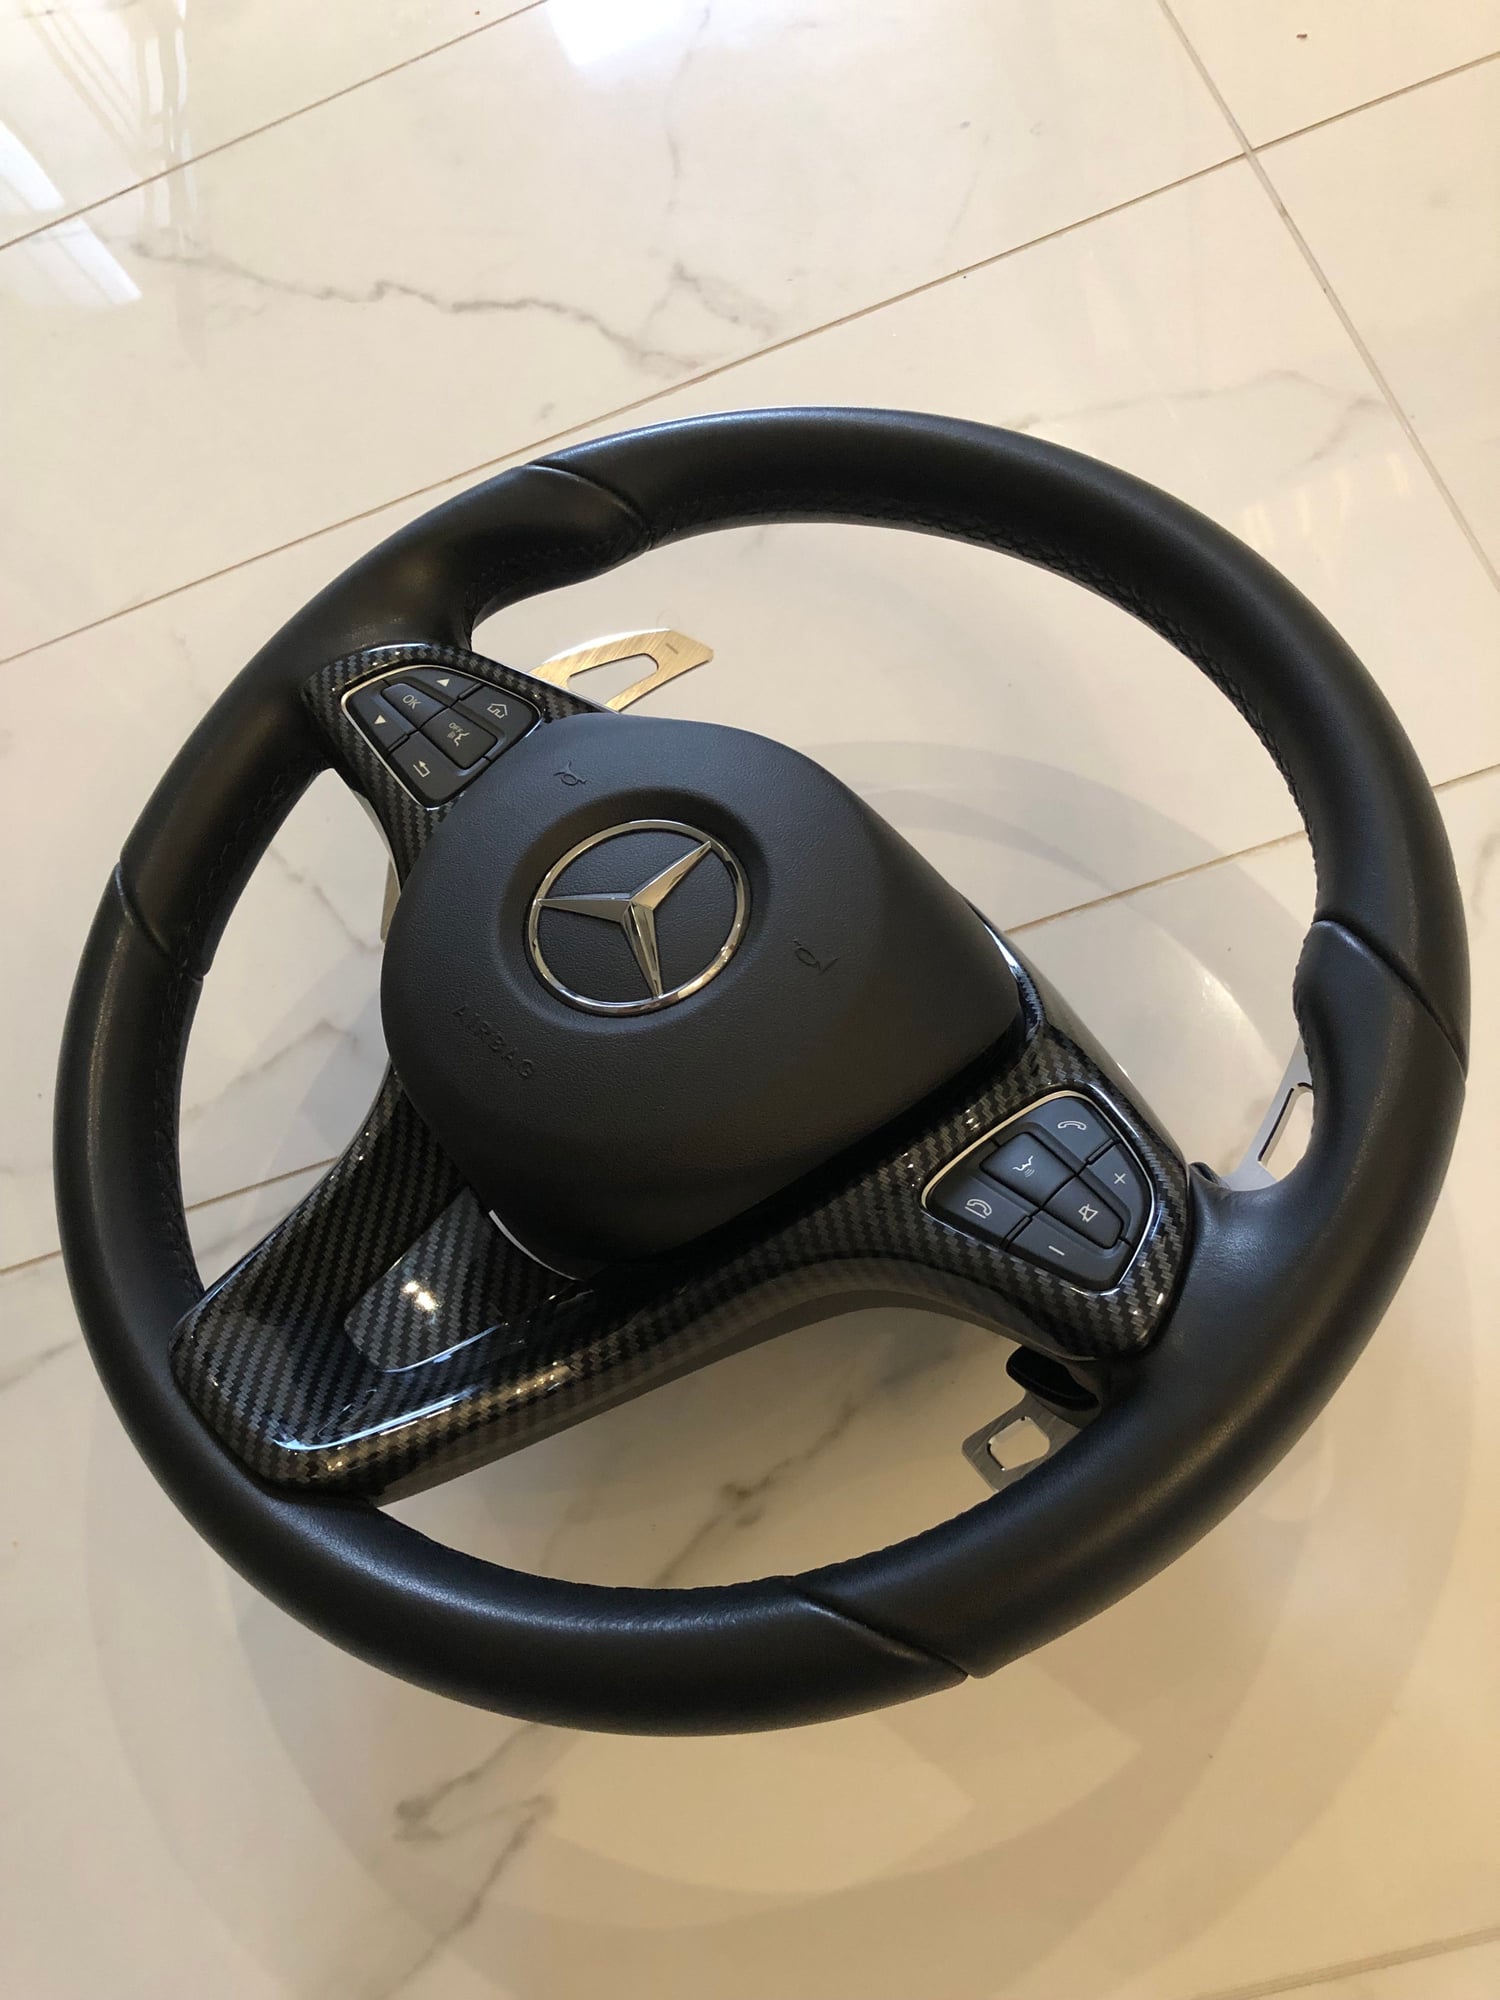 Interior/Upholstery - W205 Steering Wheel + Airbag - Used - 2014 to 2018 Mercedes-Benz C300 - Kauniainen, Finland